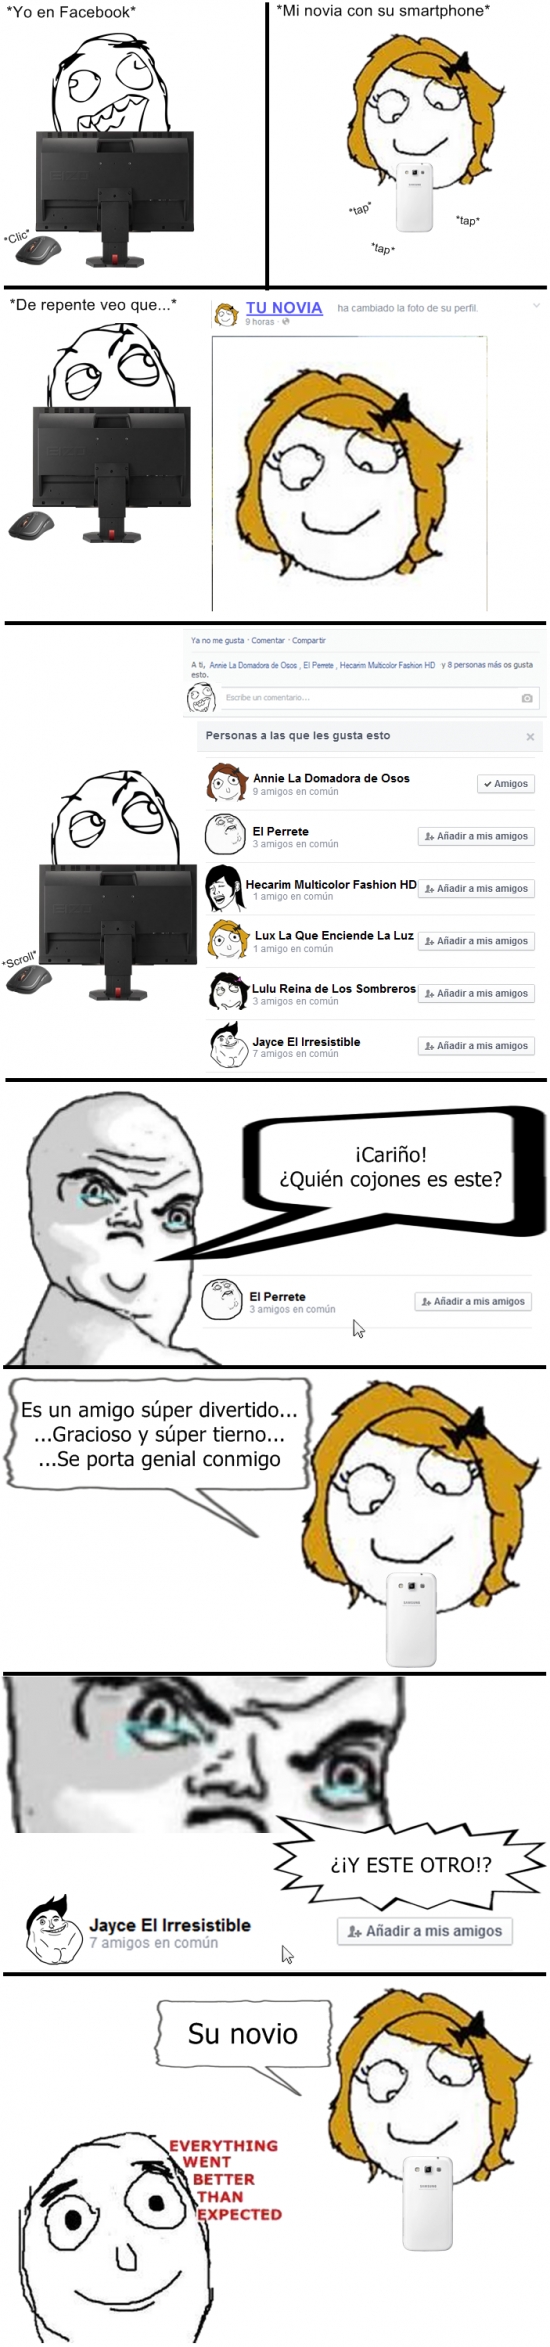 celos,everything was better than expected,facebook,fb,likes,me gusta,not okay,novia,pc,rubia,smartphone